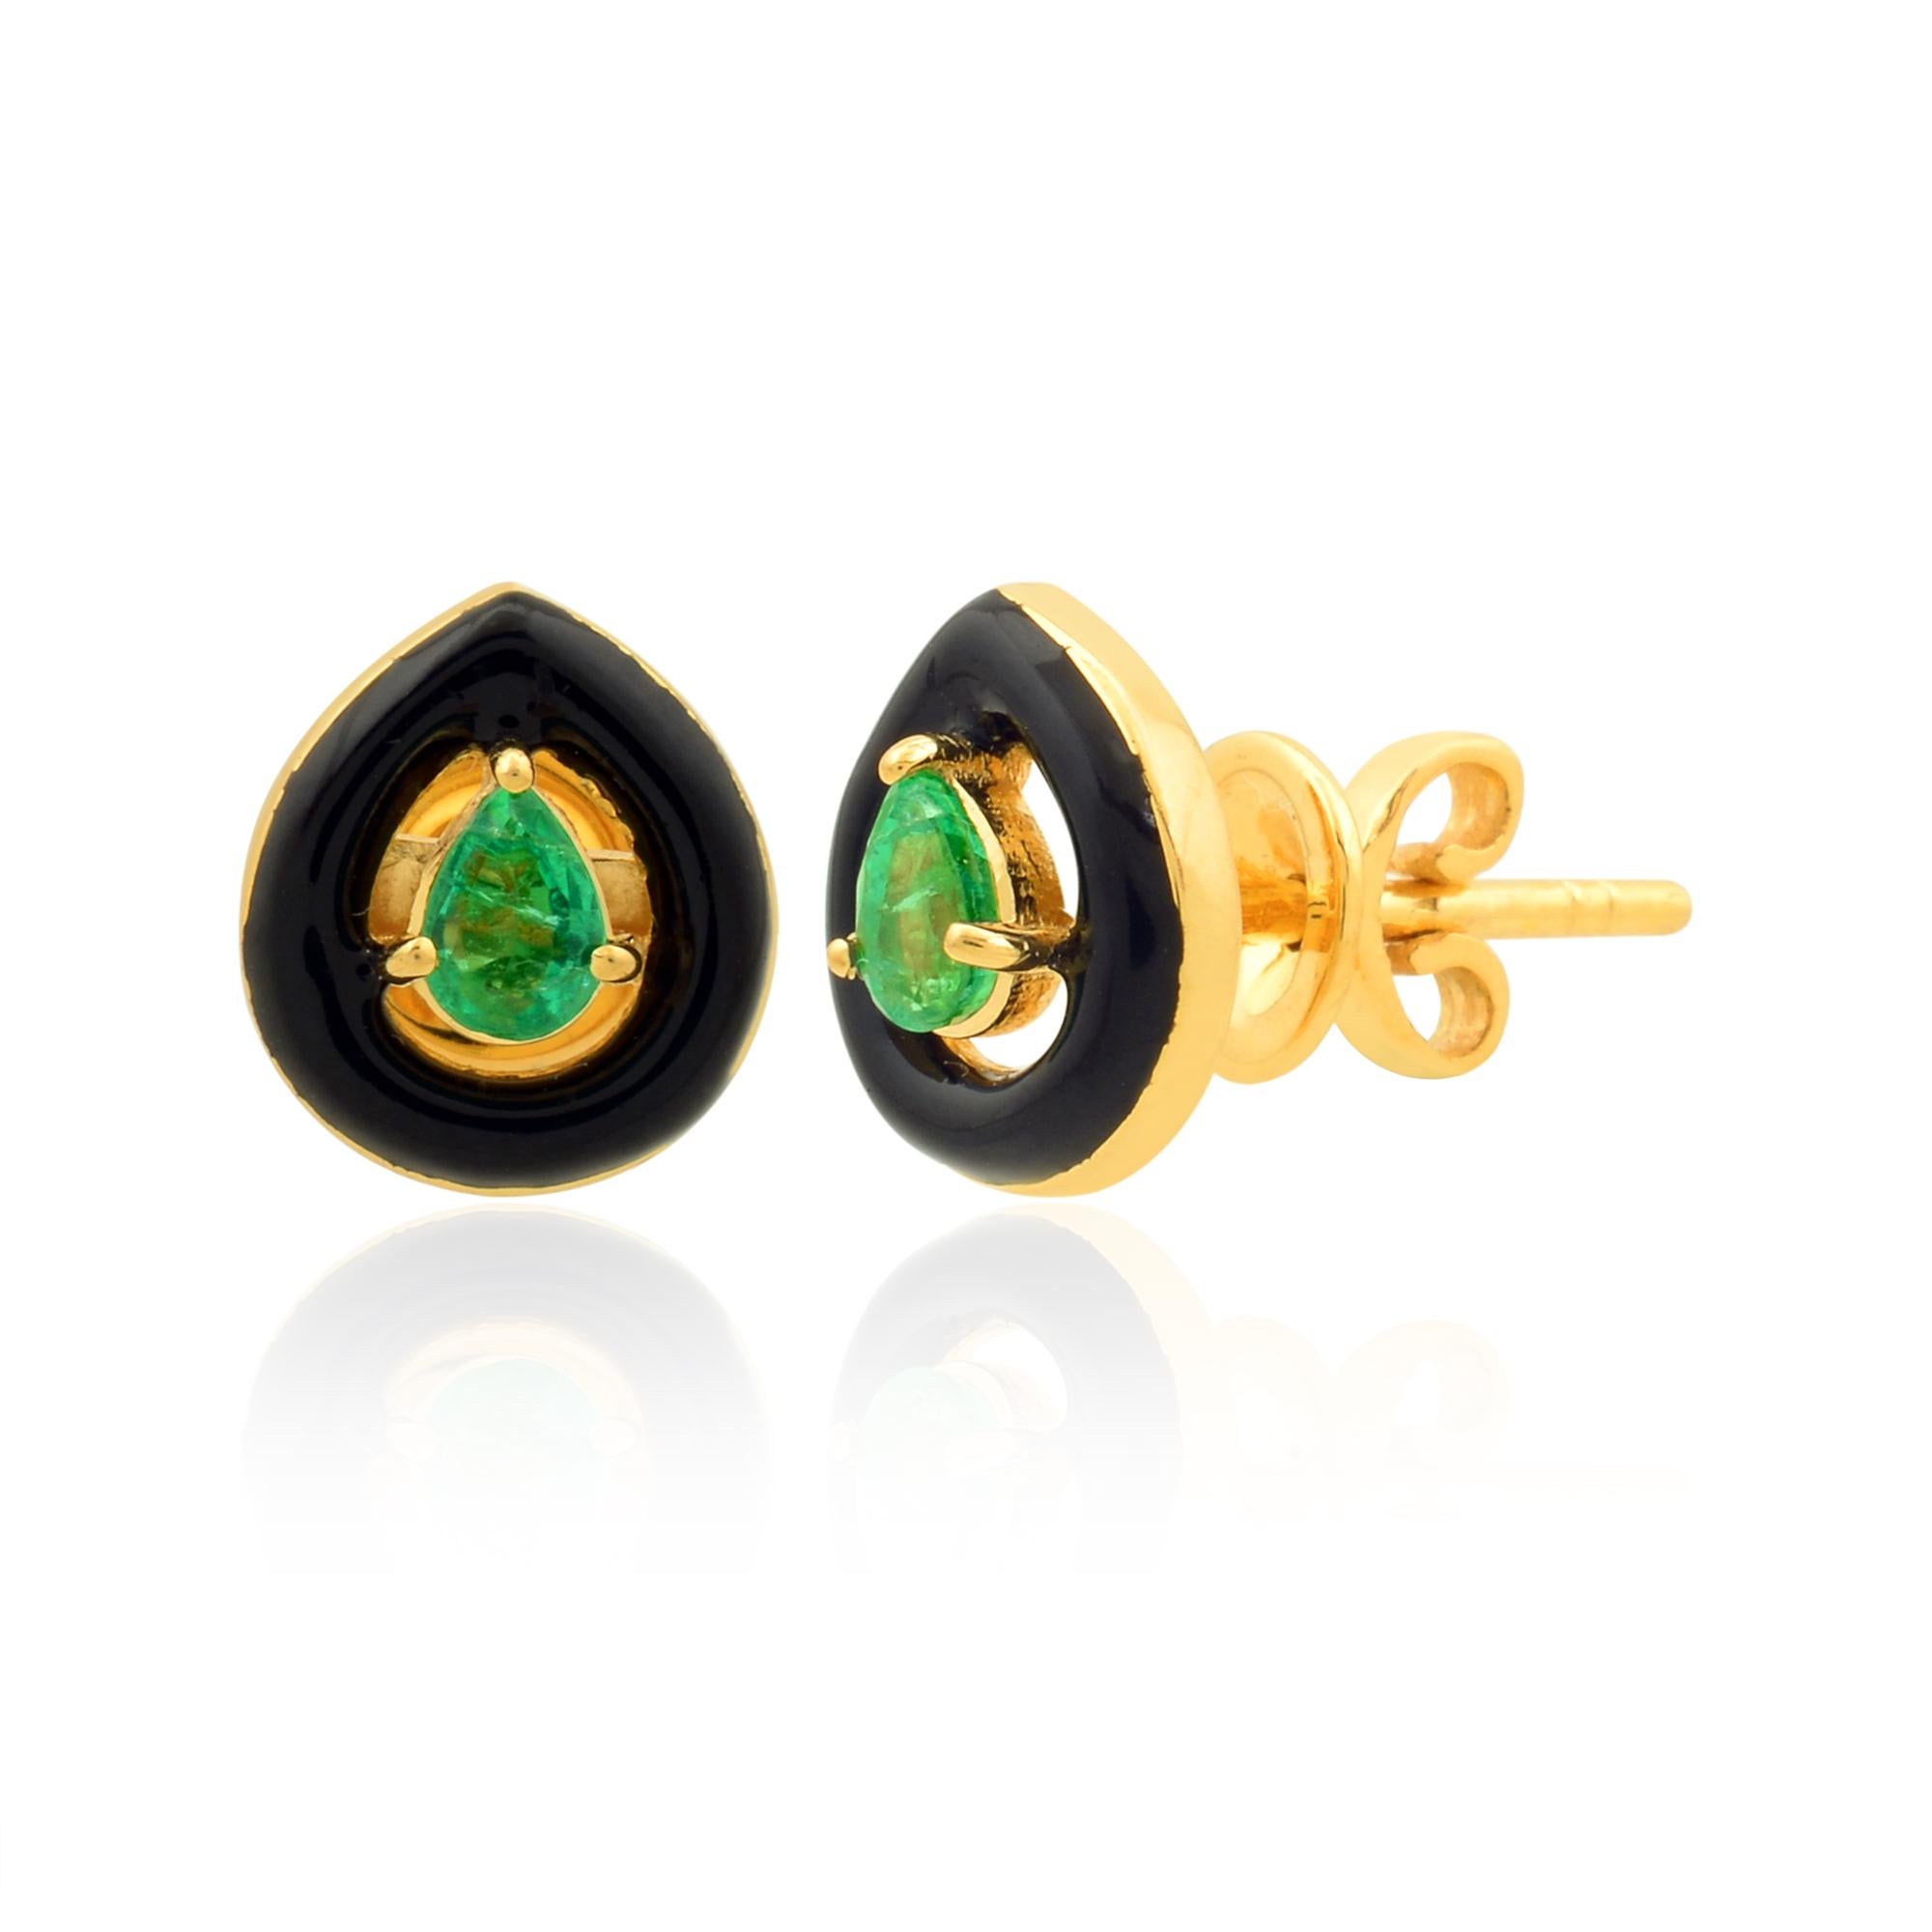 Indulge in the timeless elegance of these exquisite Pear Zambian Emerald Gemstone Stud Earrings crafted with meticulous attention to detail. Each earring features a lustrous pear-shaped Zambian emerald, renowned for its captivating green hue and